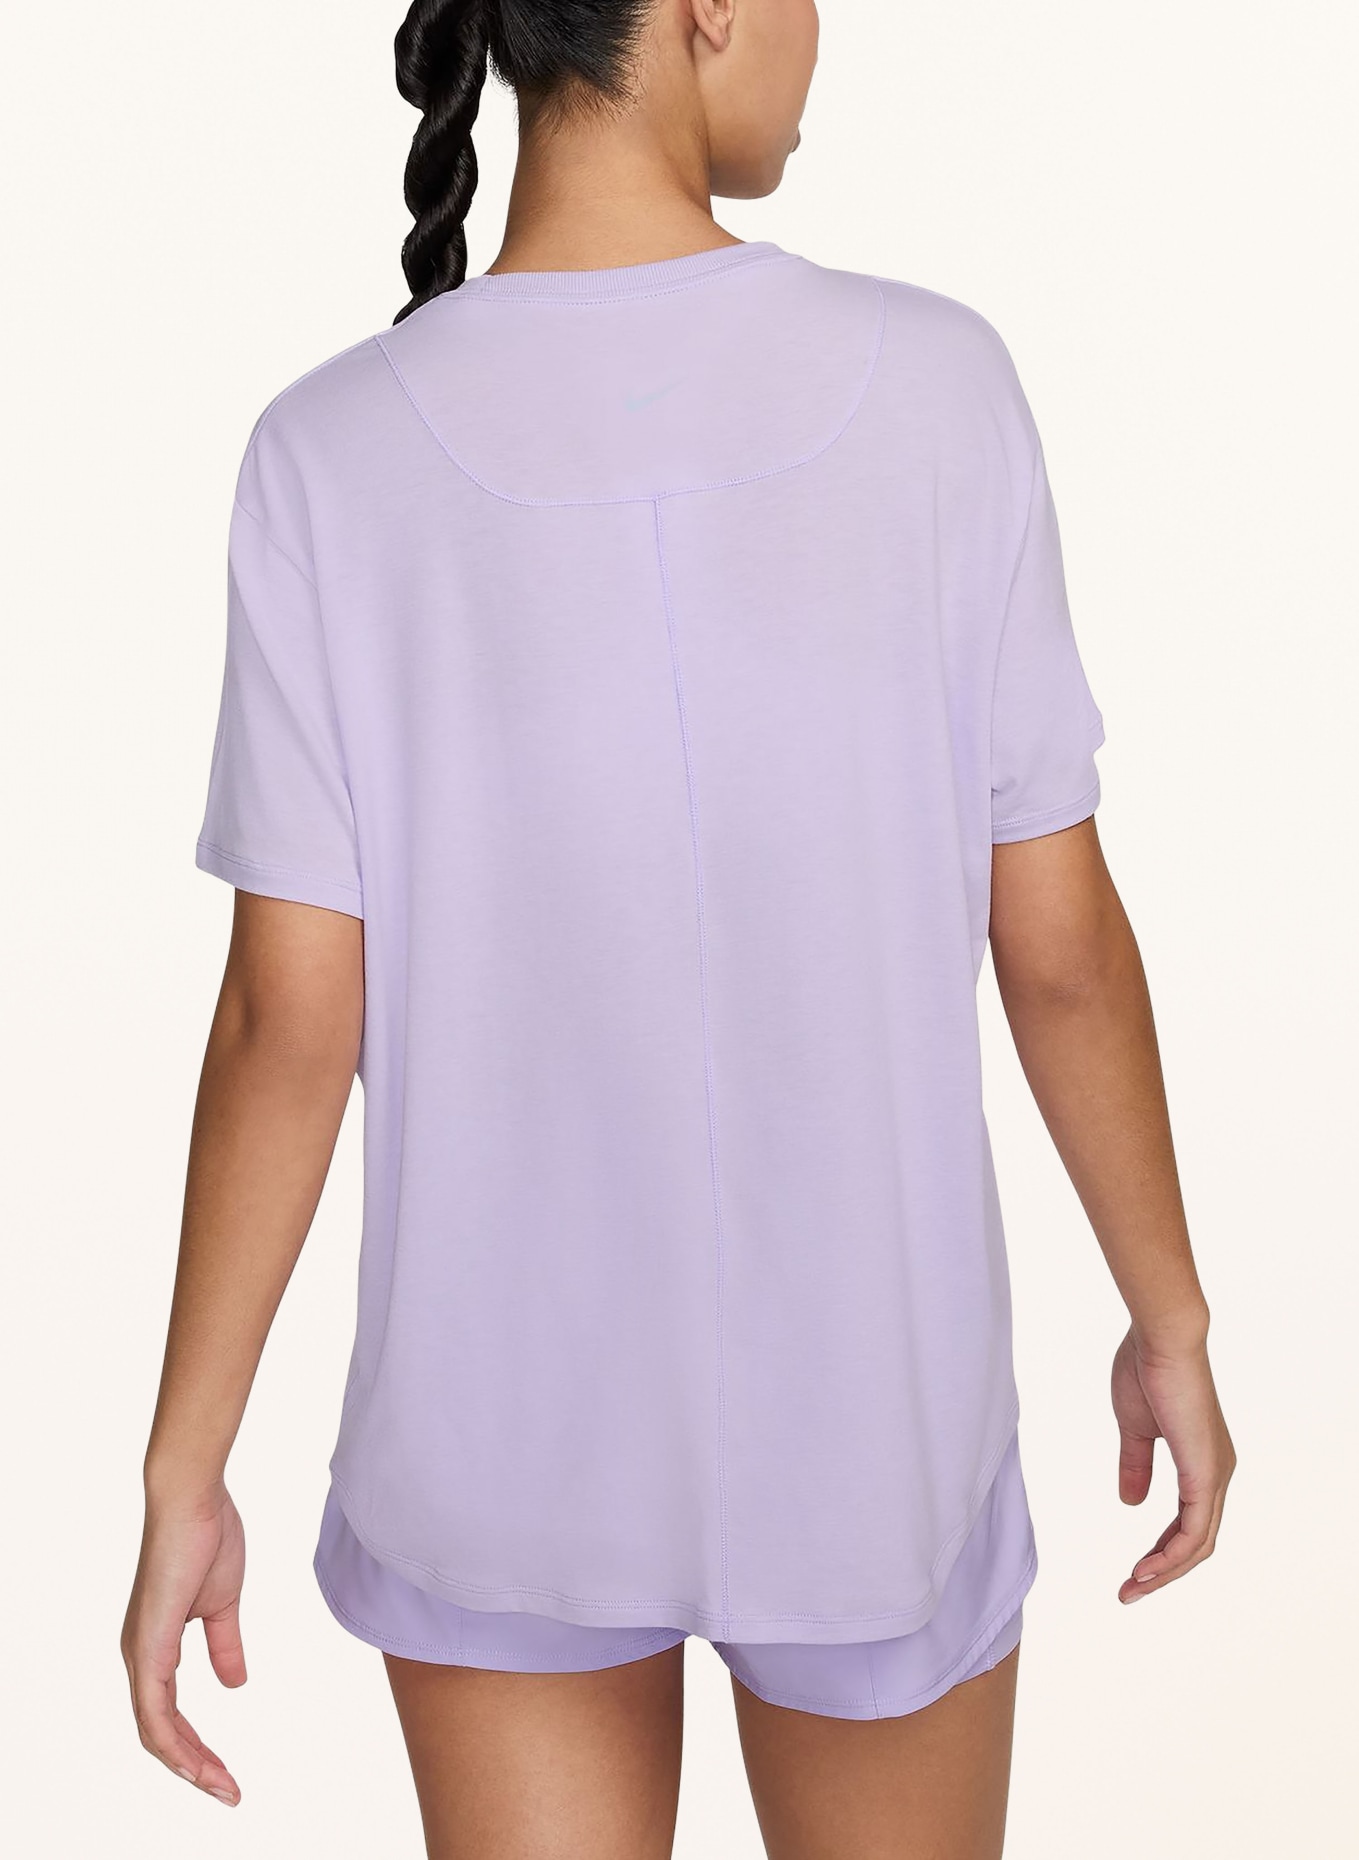 Nike T-shirt ONE RELAXED DRI-FIT, Color: LIGHT PURPLE (Image 3)